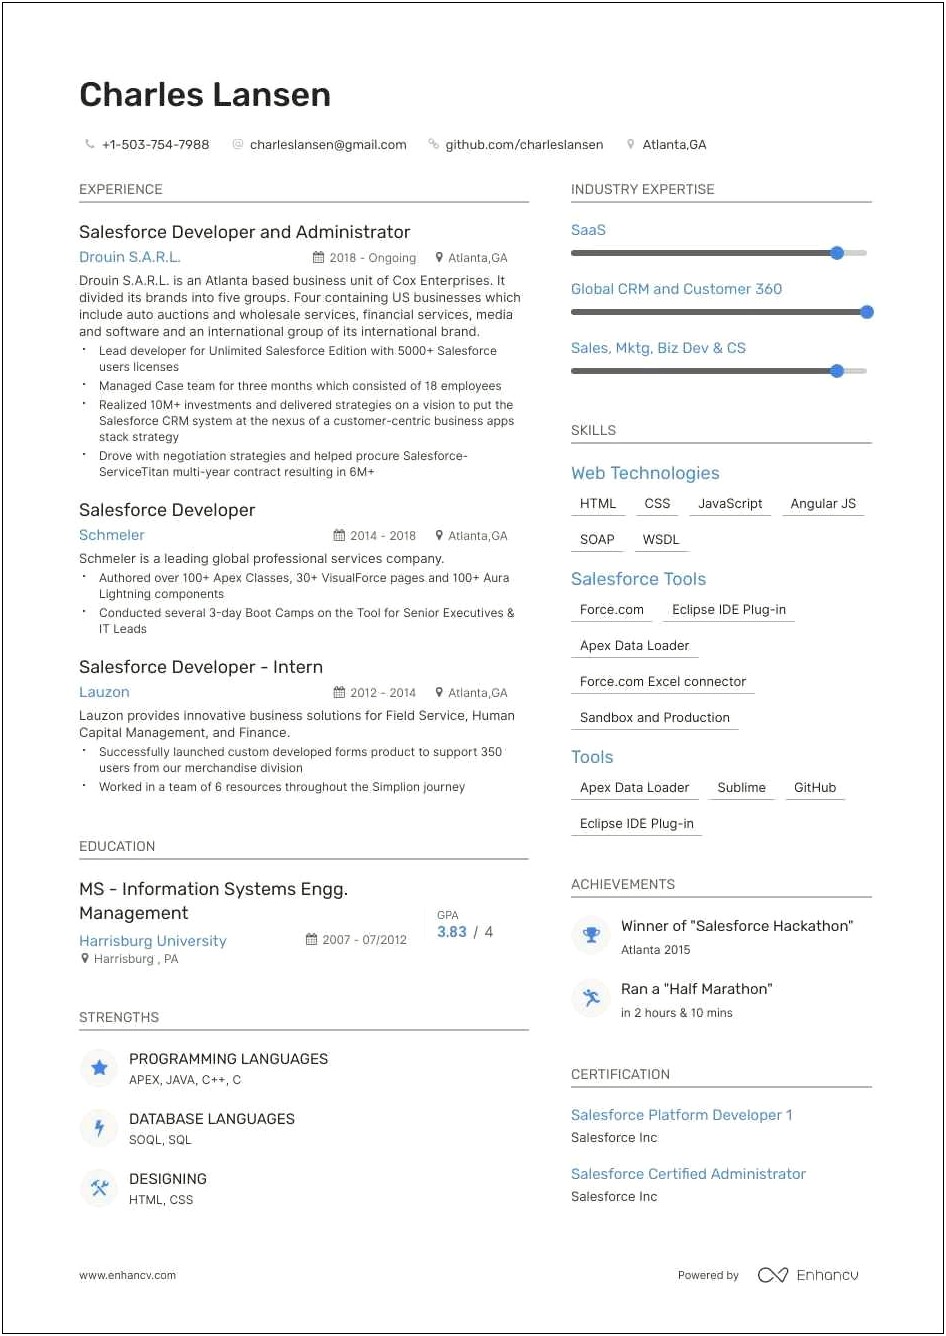 Can We Use Trailhead Experience On Resume